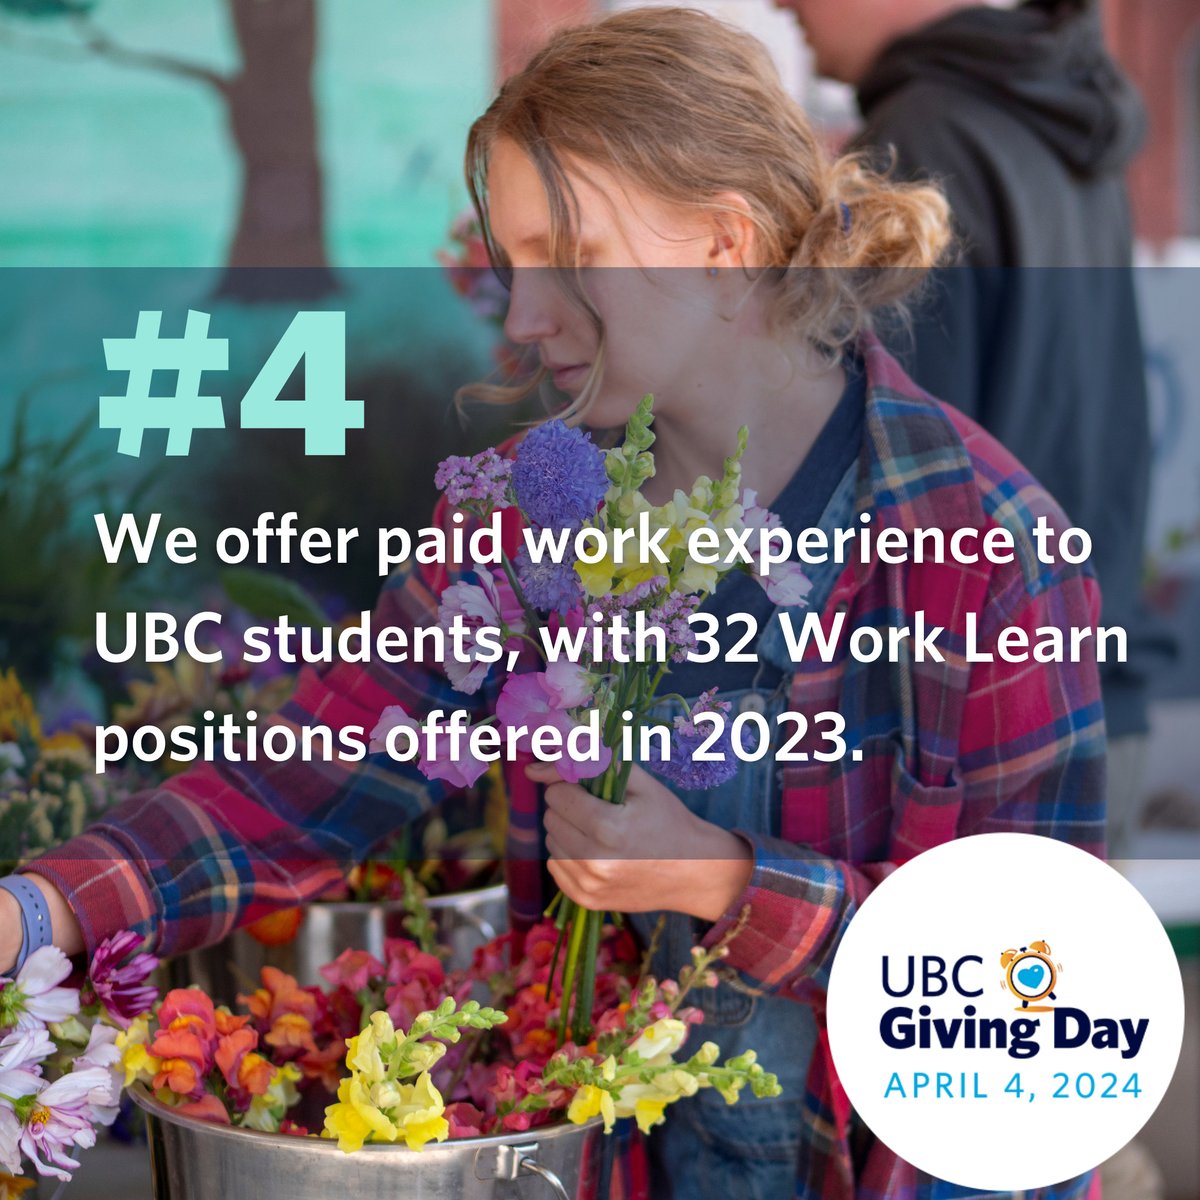 We only need 24 hours to move the world forward! Today, on UBC Giving Day, give what you can towards the causes you believe in most. Here's four reasons why the UBC Farm needs your support! Donate today: givingday.ubc.ca/28330/givingda… #UBCGivingDay